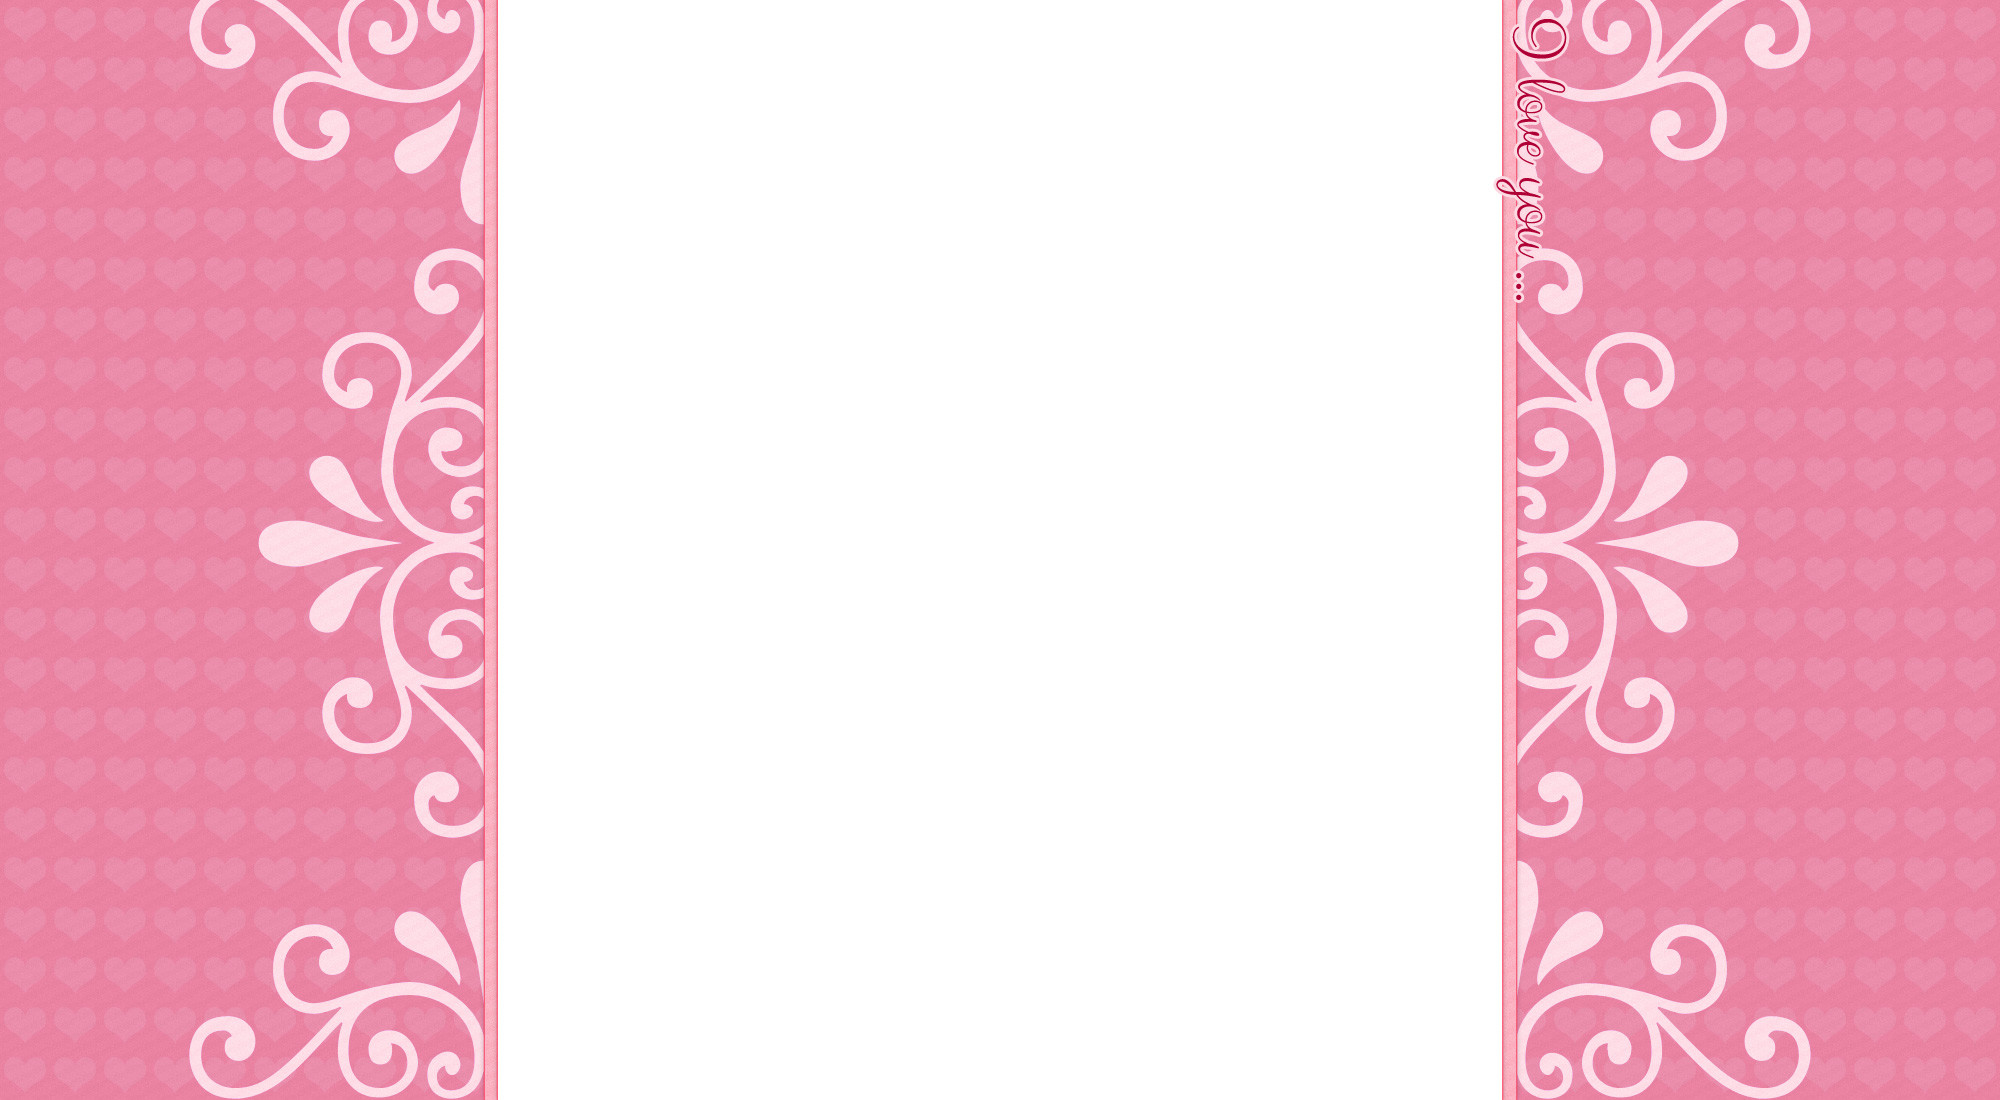 You might also like Free Valentines Blog Backgrounds